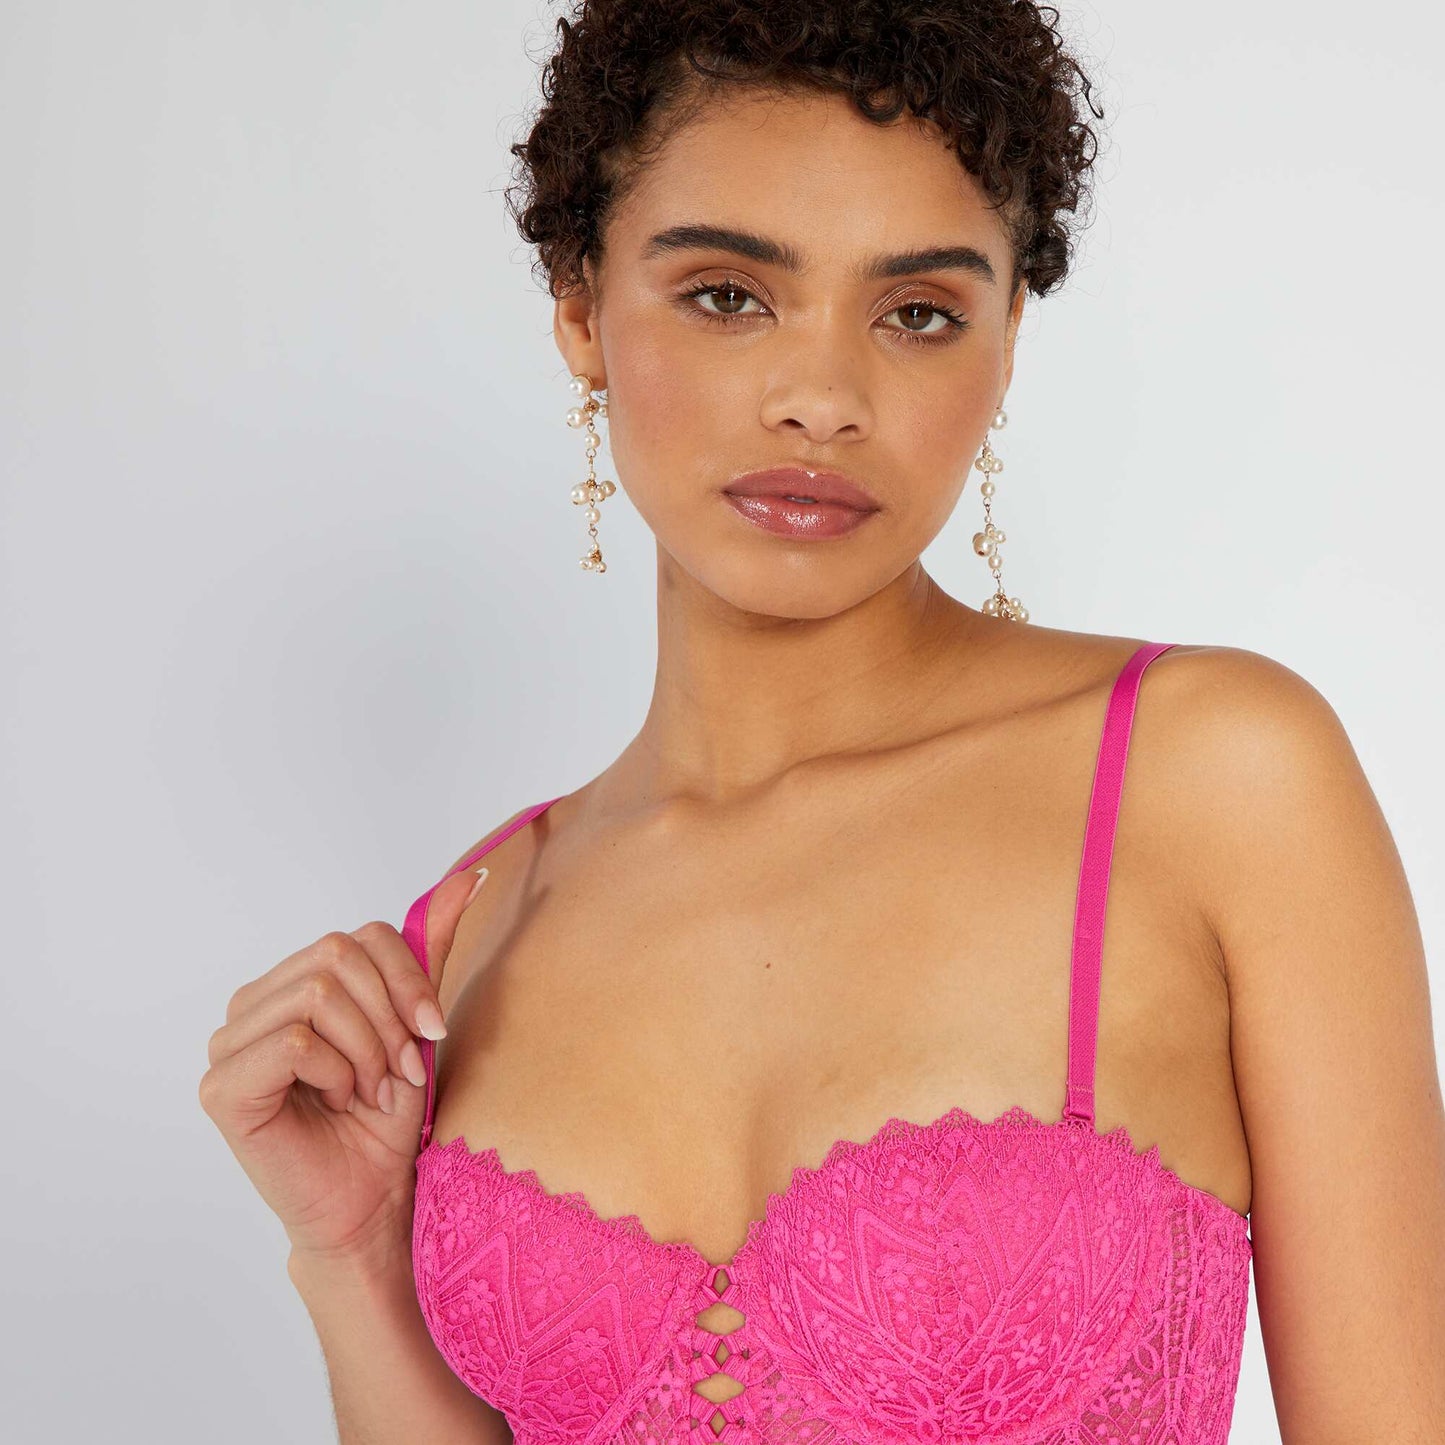 Lace bustier bra PINK BERRY